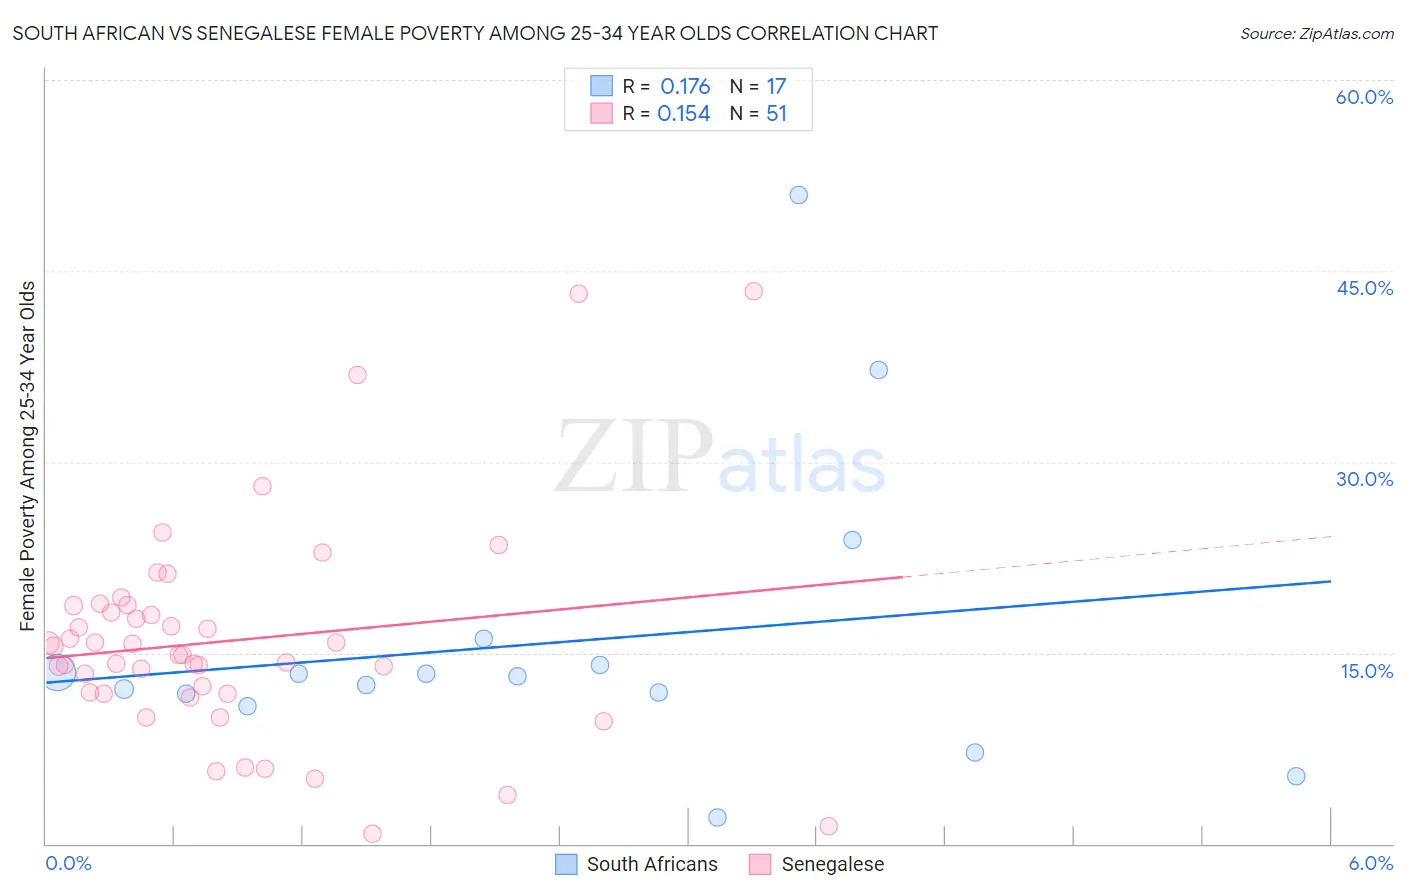 South African vs Senegalese Female Poverty Among 25-34 Year Olds